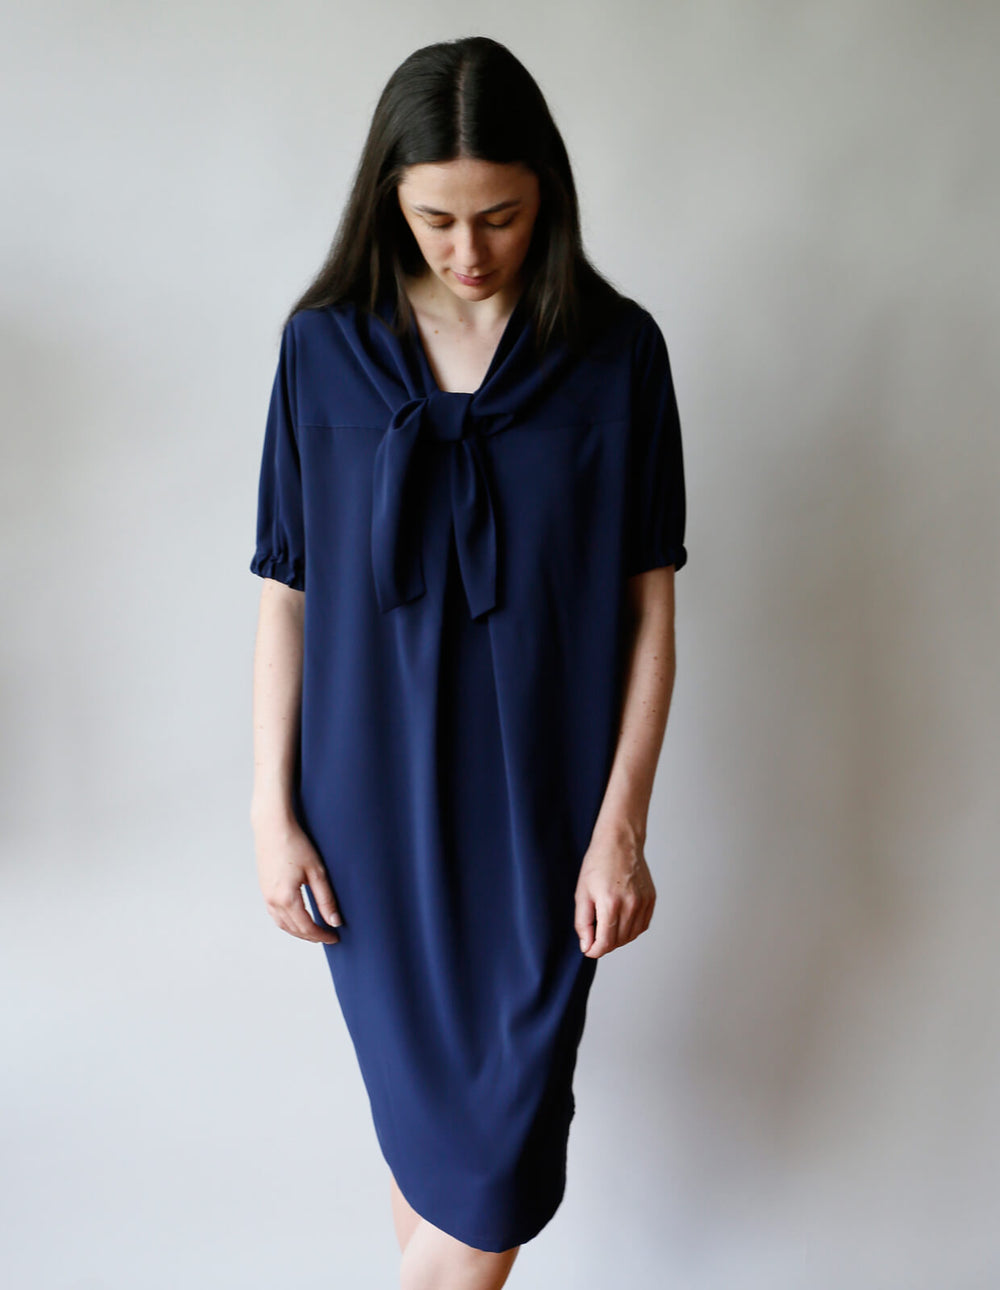 The Maker's Atelier Tie Blouse and Dress